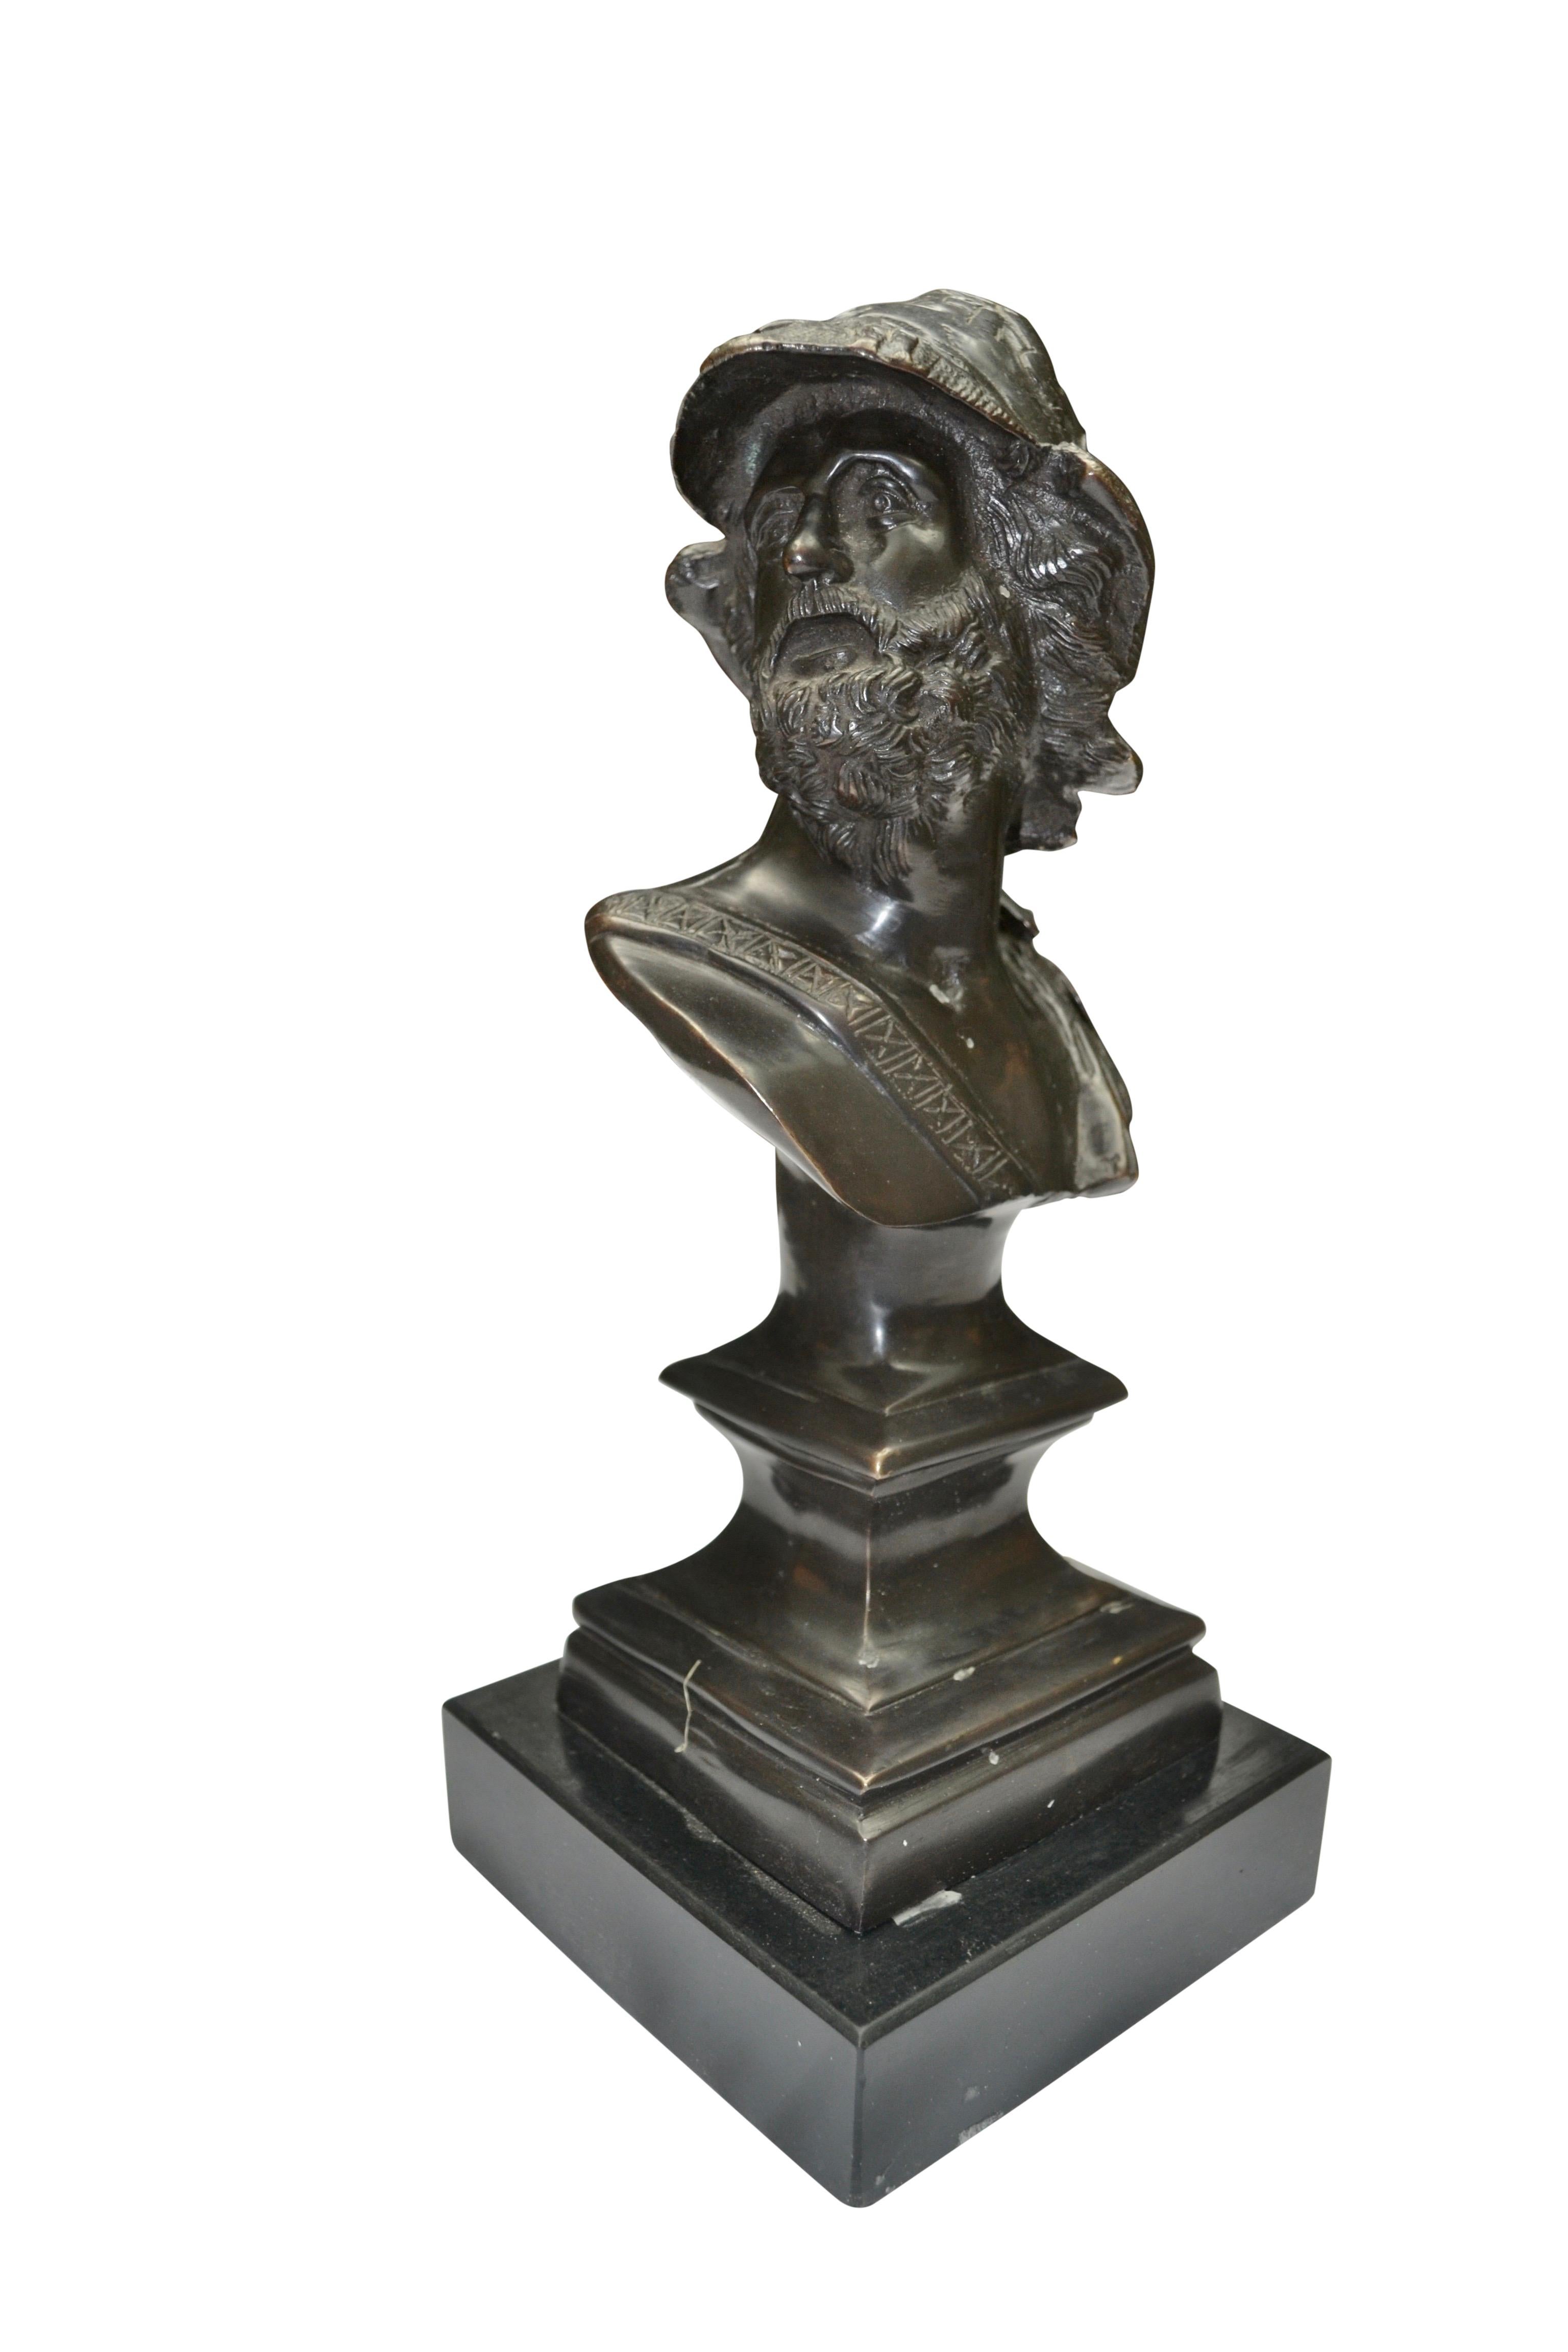 A fine patinated bronze bust of Pericles on a stepped black marble base.  A magnificent orator with a reputation for scrupulous honesty, Pericles was a keen patron of learning and the arts.  He also masterminded the construction of the Parthenon but